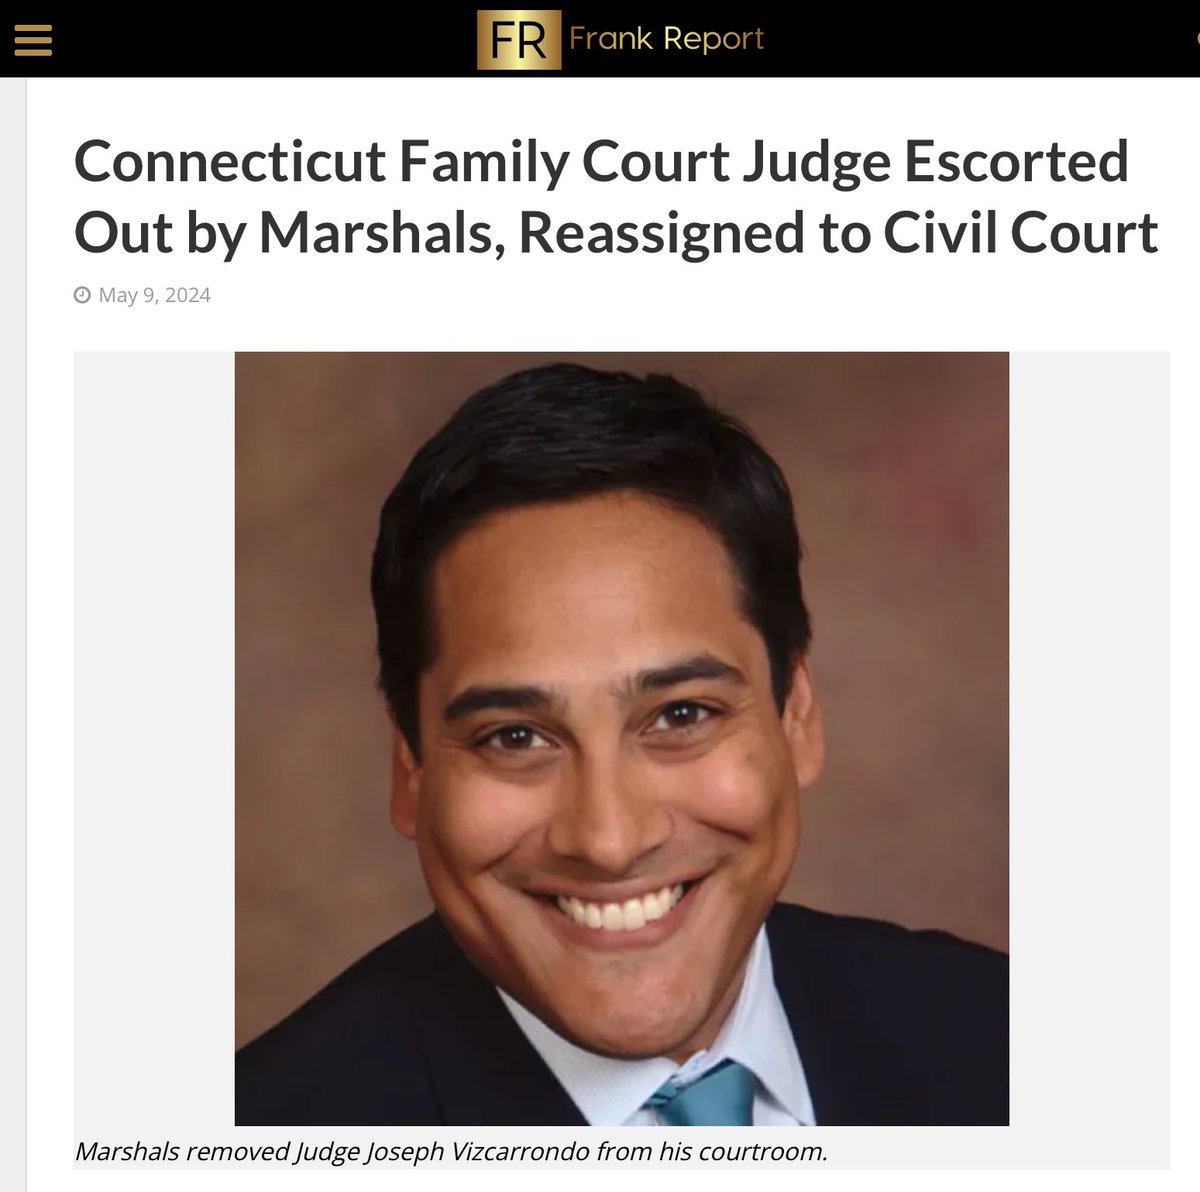 This Is A #MustRead Article About #FamilyCourt And A Victory For Truth, Rule of Law, Fairness, Families and Children

Connecticut Family Court Judge Escorted Out by Marshals, Reassigned to Civil Court

frankreport.com/2024/05/09/con…